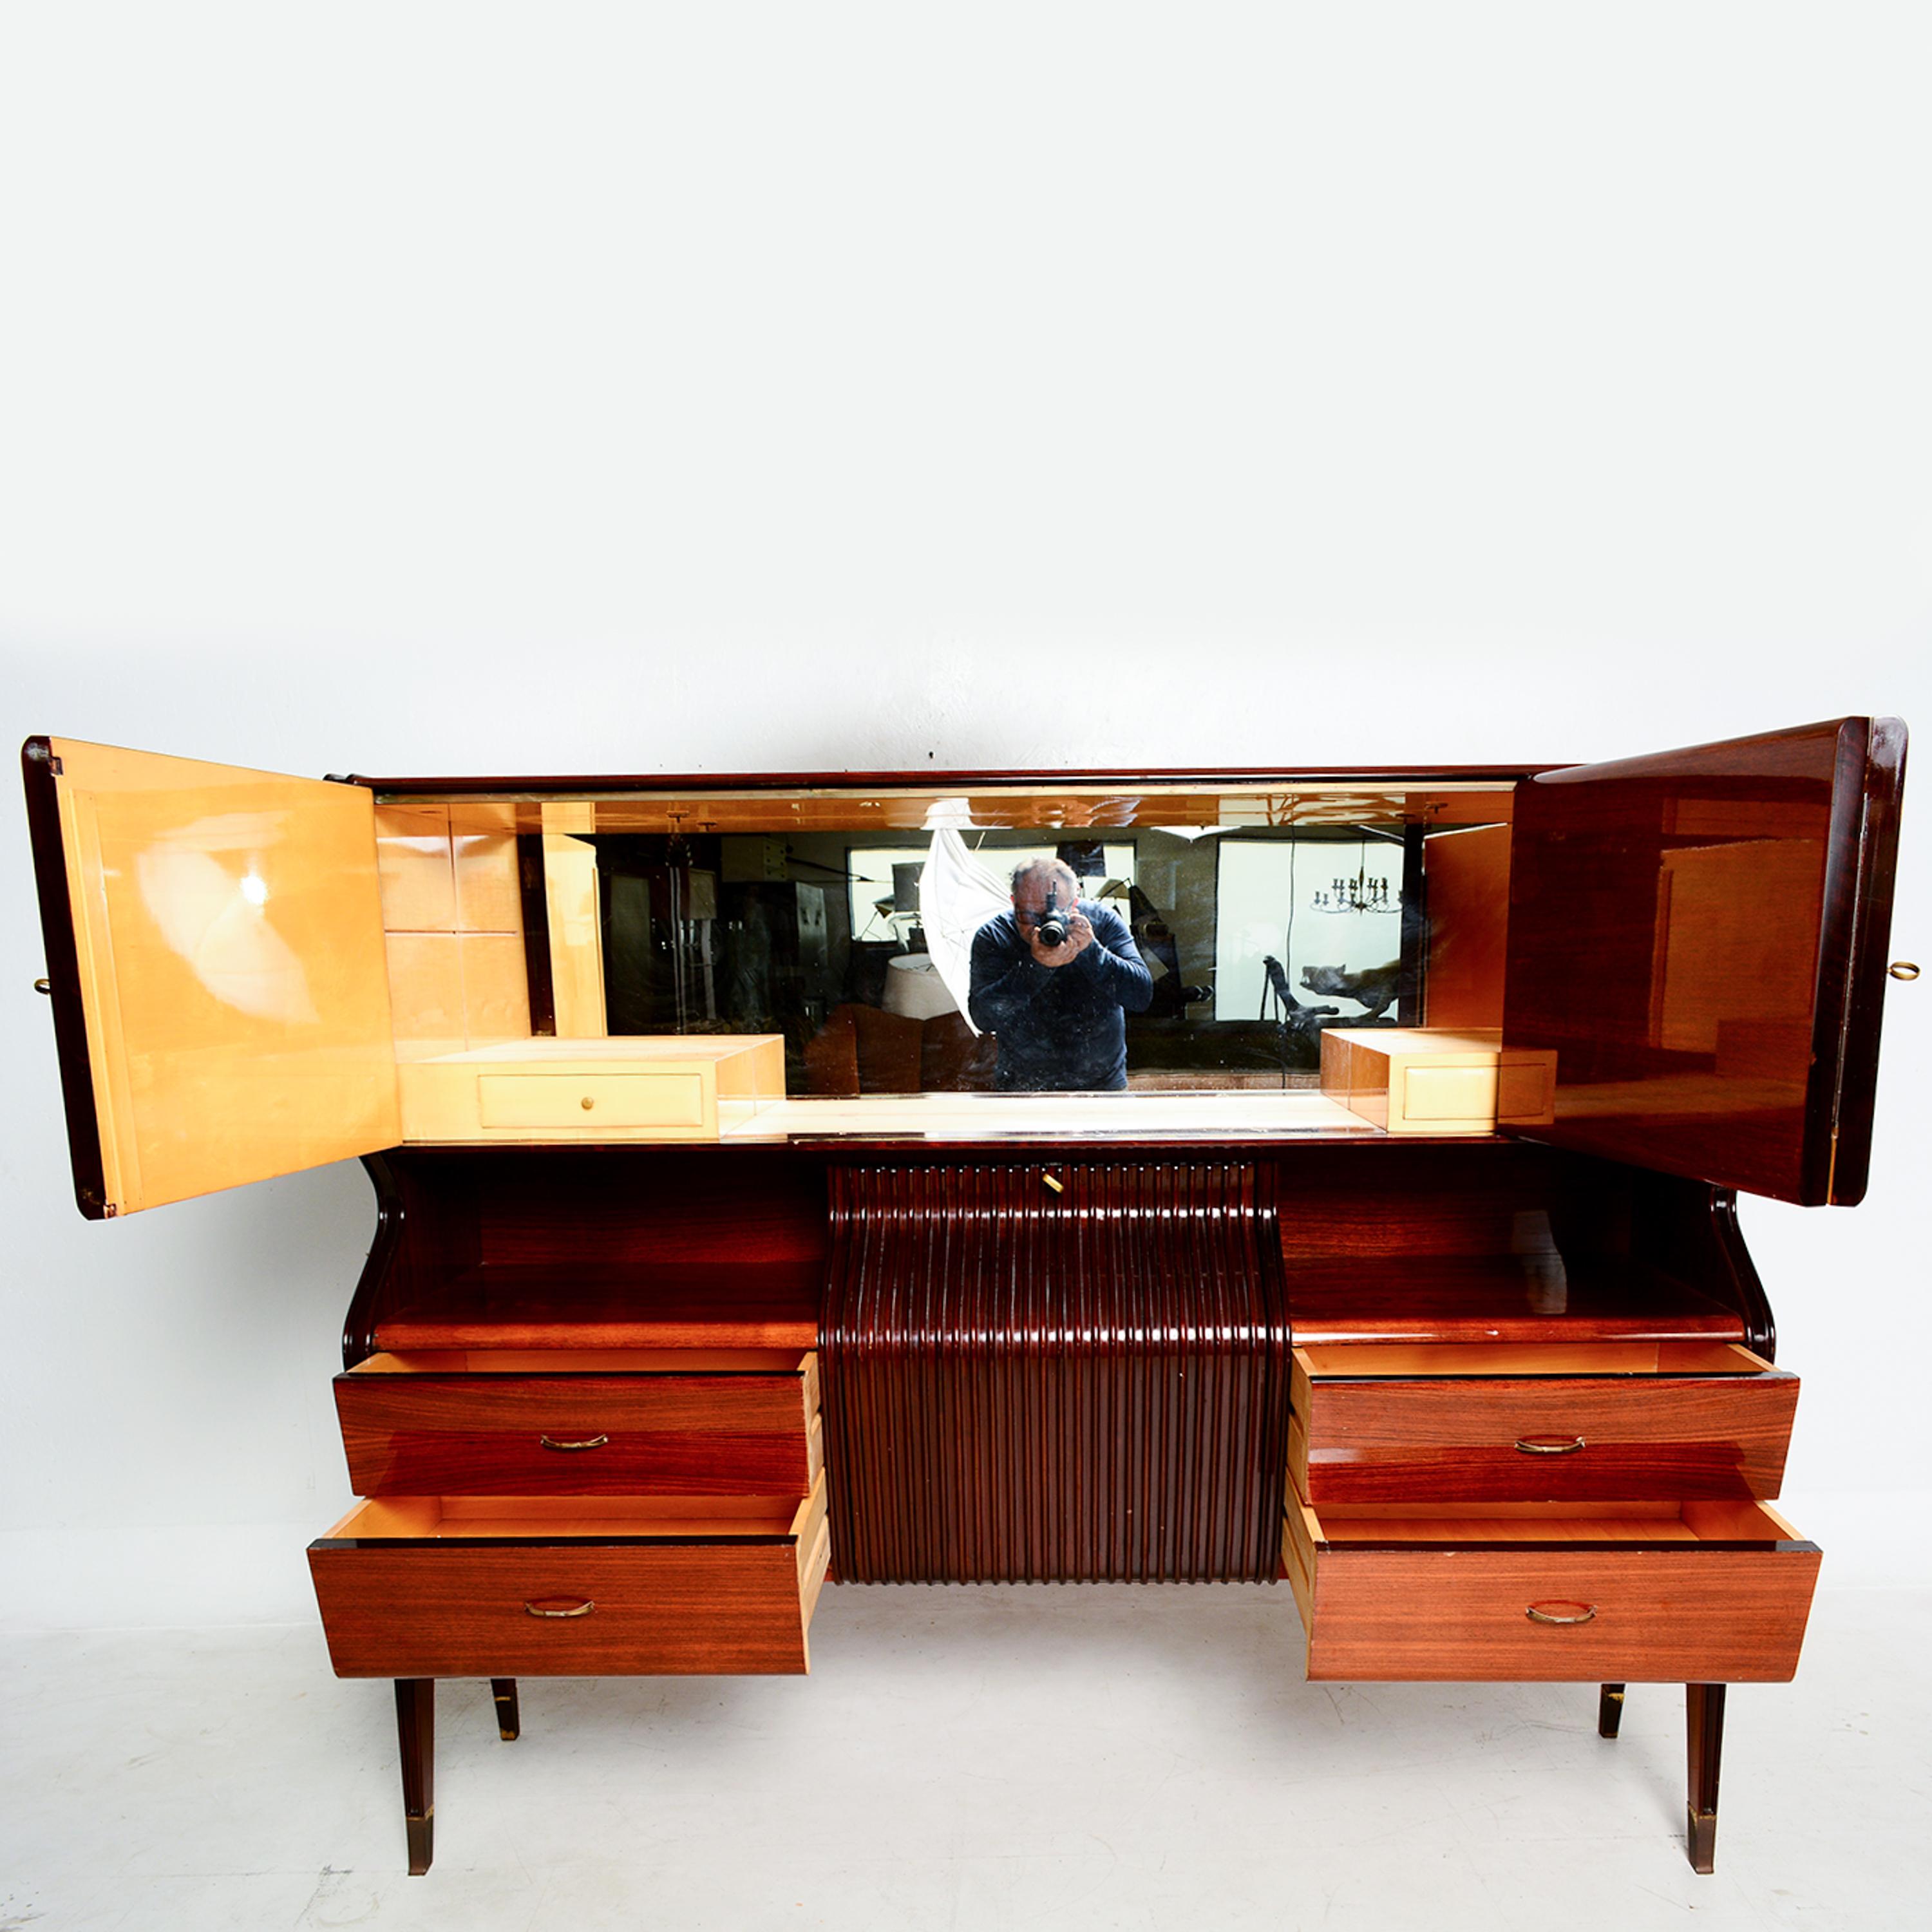 Sensational Bar Cabinet Credenza in Rosewood and Brass Italy Europe 1950s by Osvaldo Borsani.
No maker stamp.
Striking Presentation. Modern angular line.
Multifunctional piece; credenza, dry bar glass with interior mirror ample cabinet and drawer